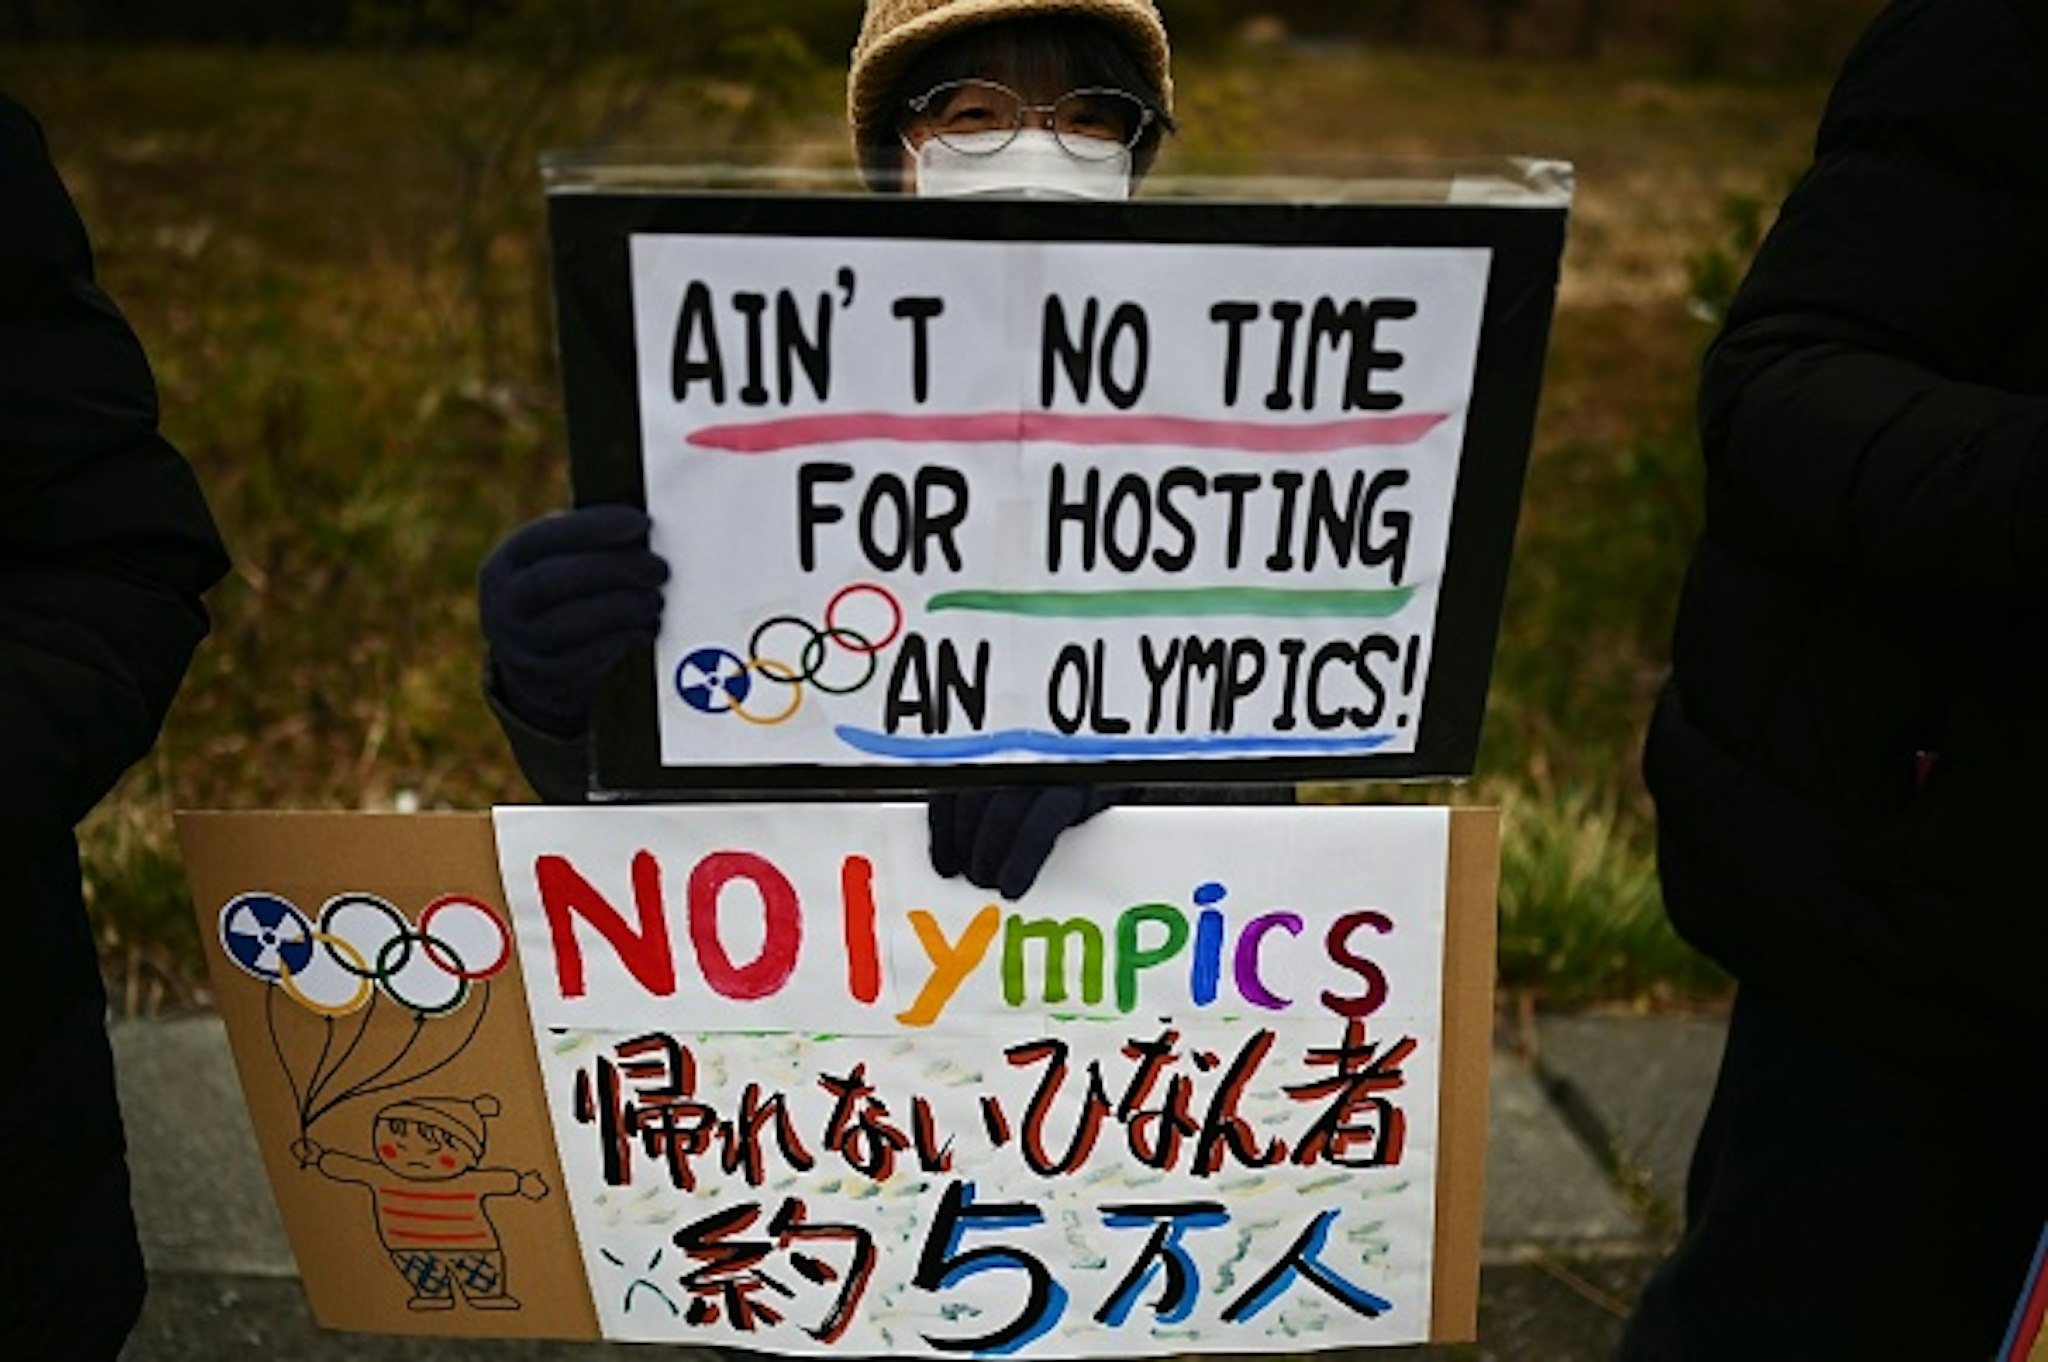 This photo taken on February 29, 2020 shows a protester holding placards during a demonstration against the Olympics, Prime Minister Shinzo Abe and nuclear energy, near the "J-Village" which will host the start of the Olympic torch relay in Naraha, Fukushima prefecture. - Tokyo 2020 CEO Toshiro Muto said on February 26 the torch relay scheduled to begin March 26 in Fukushima and travel across the country would not be cancelled, though he acknowledged adjustments might be necessary, due to the COVID-19 outbreak.